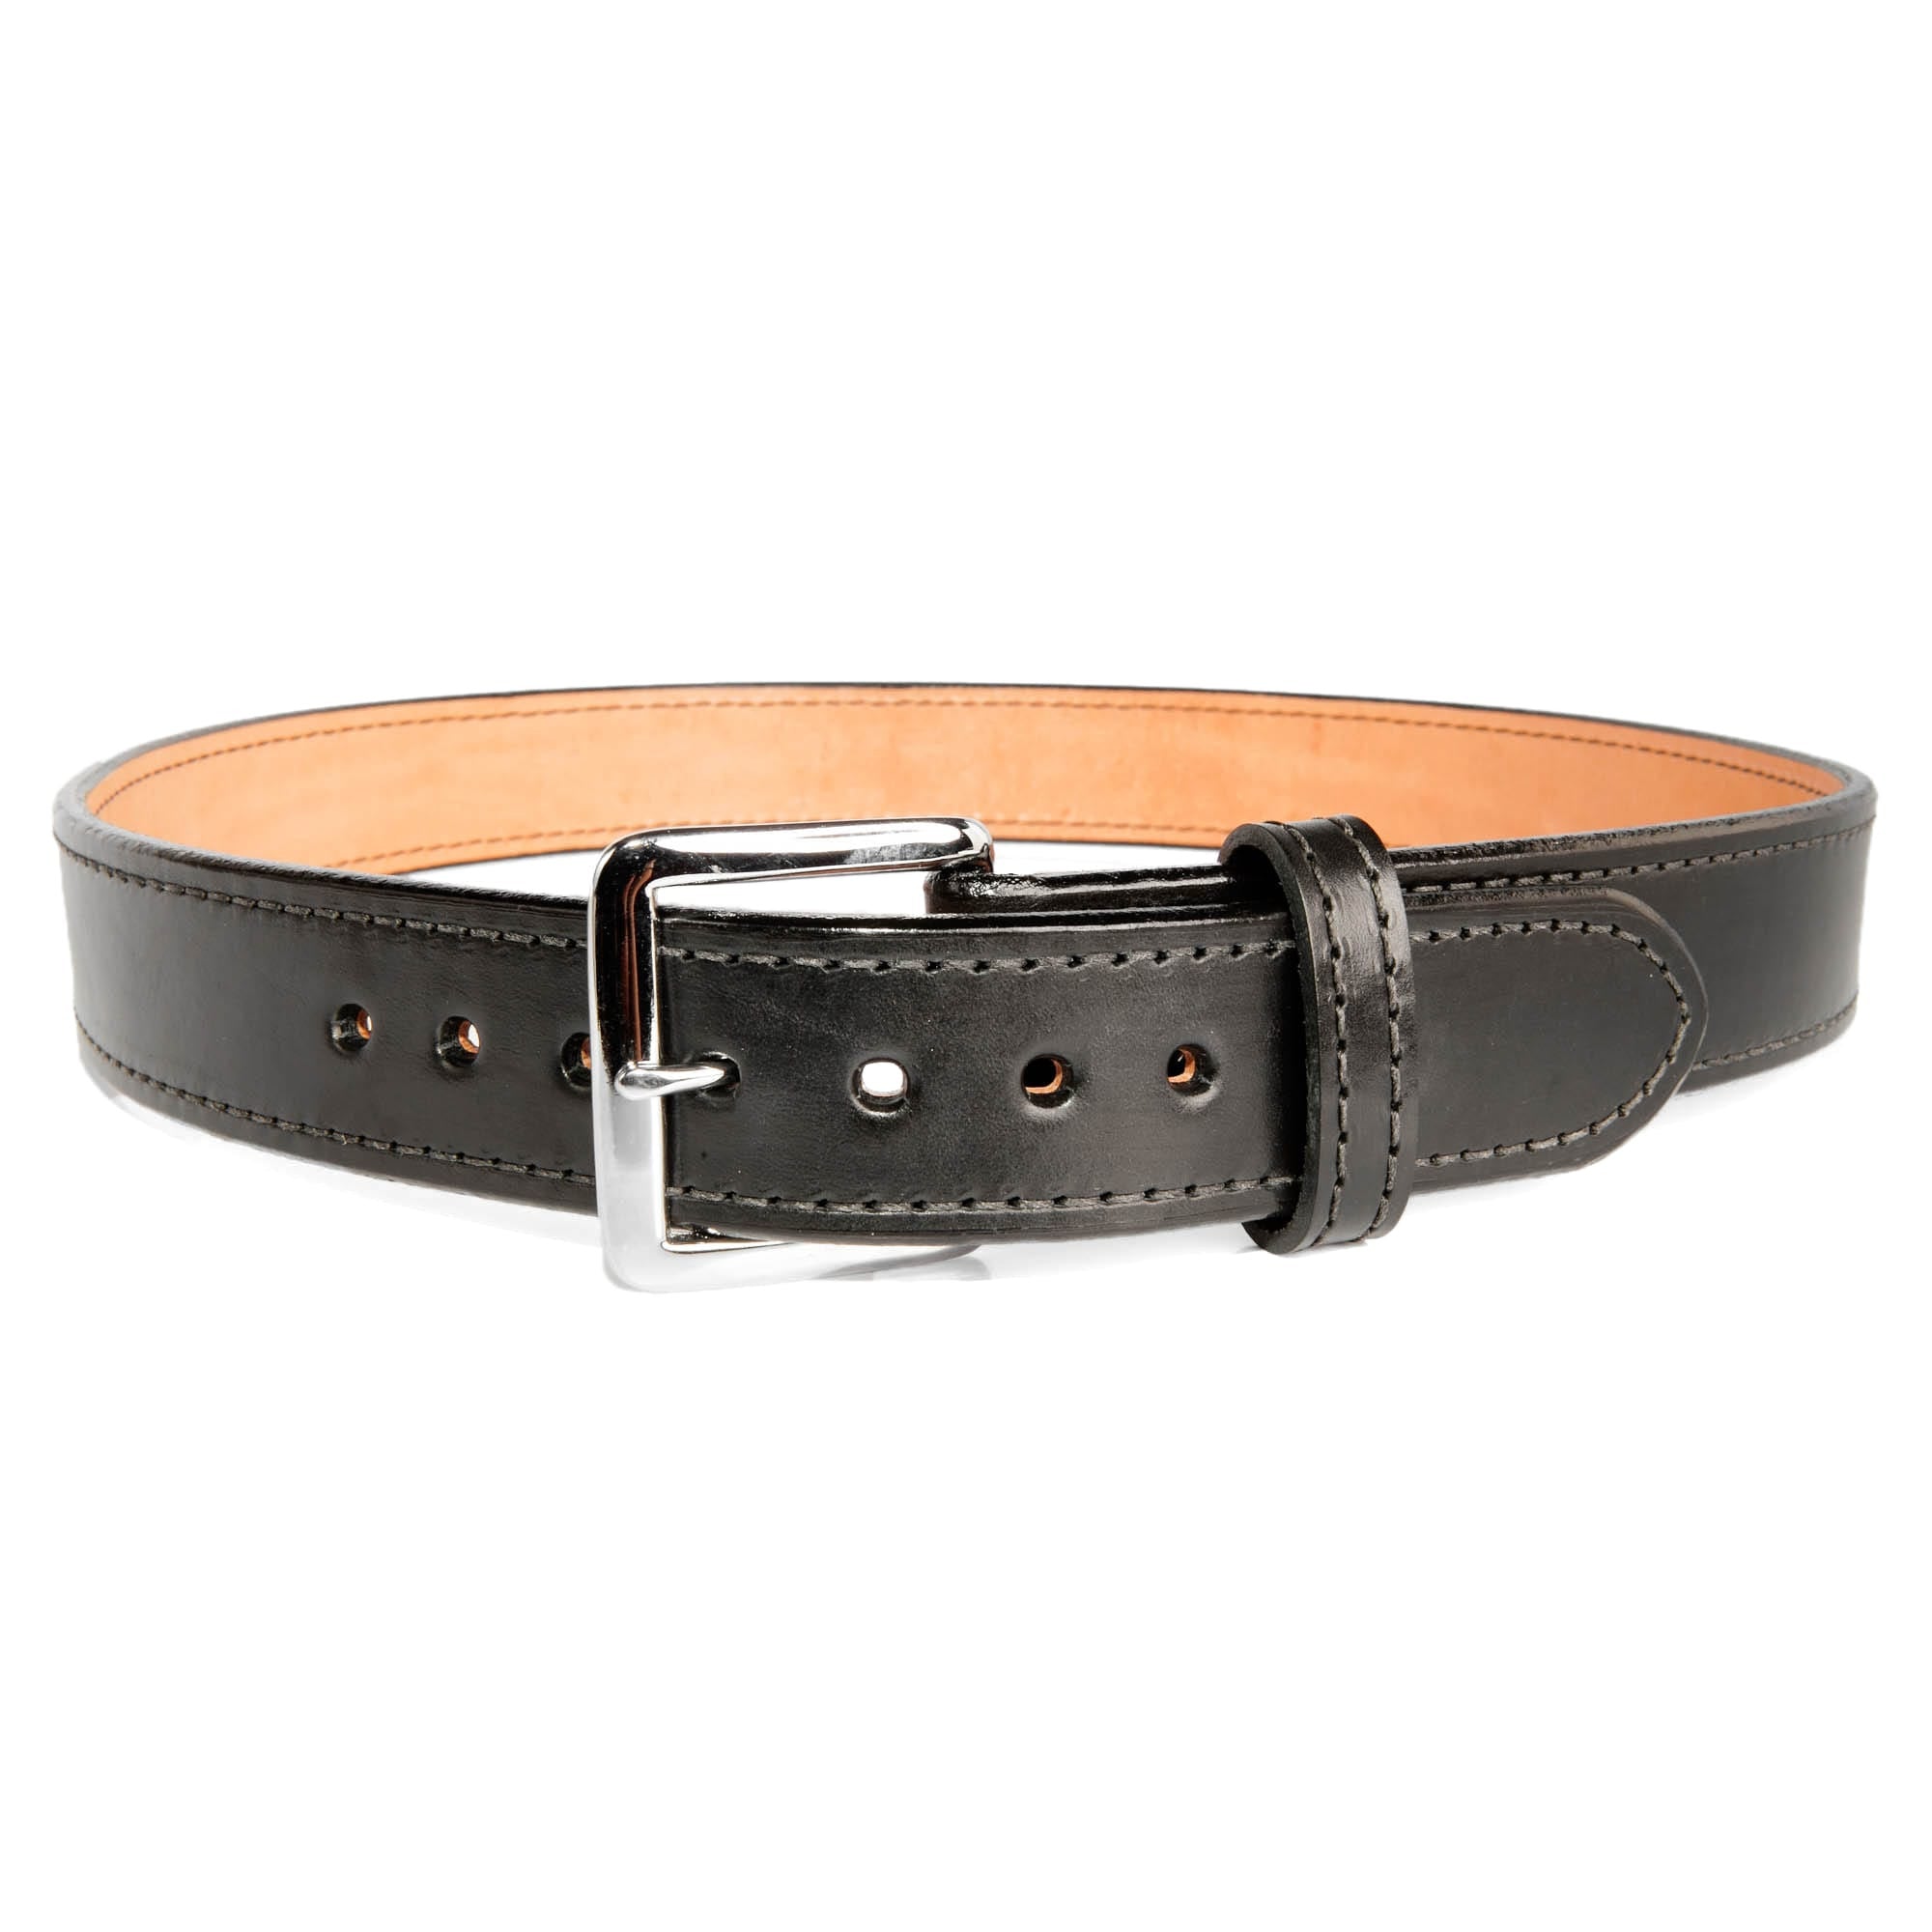 Black Leather Belt With Square Brass Buckle, 1.5 Width -  Canada